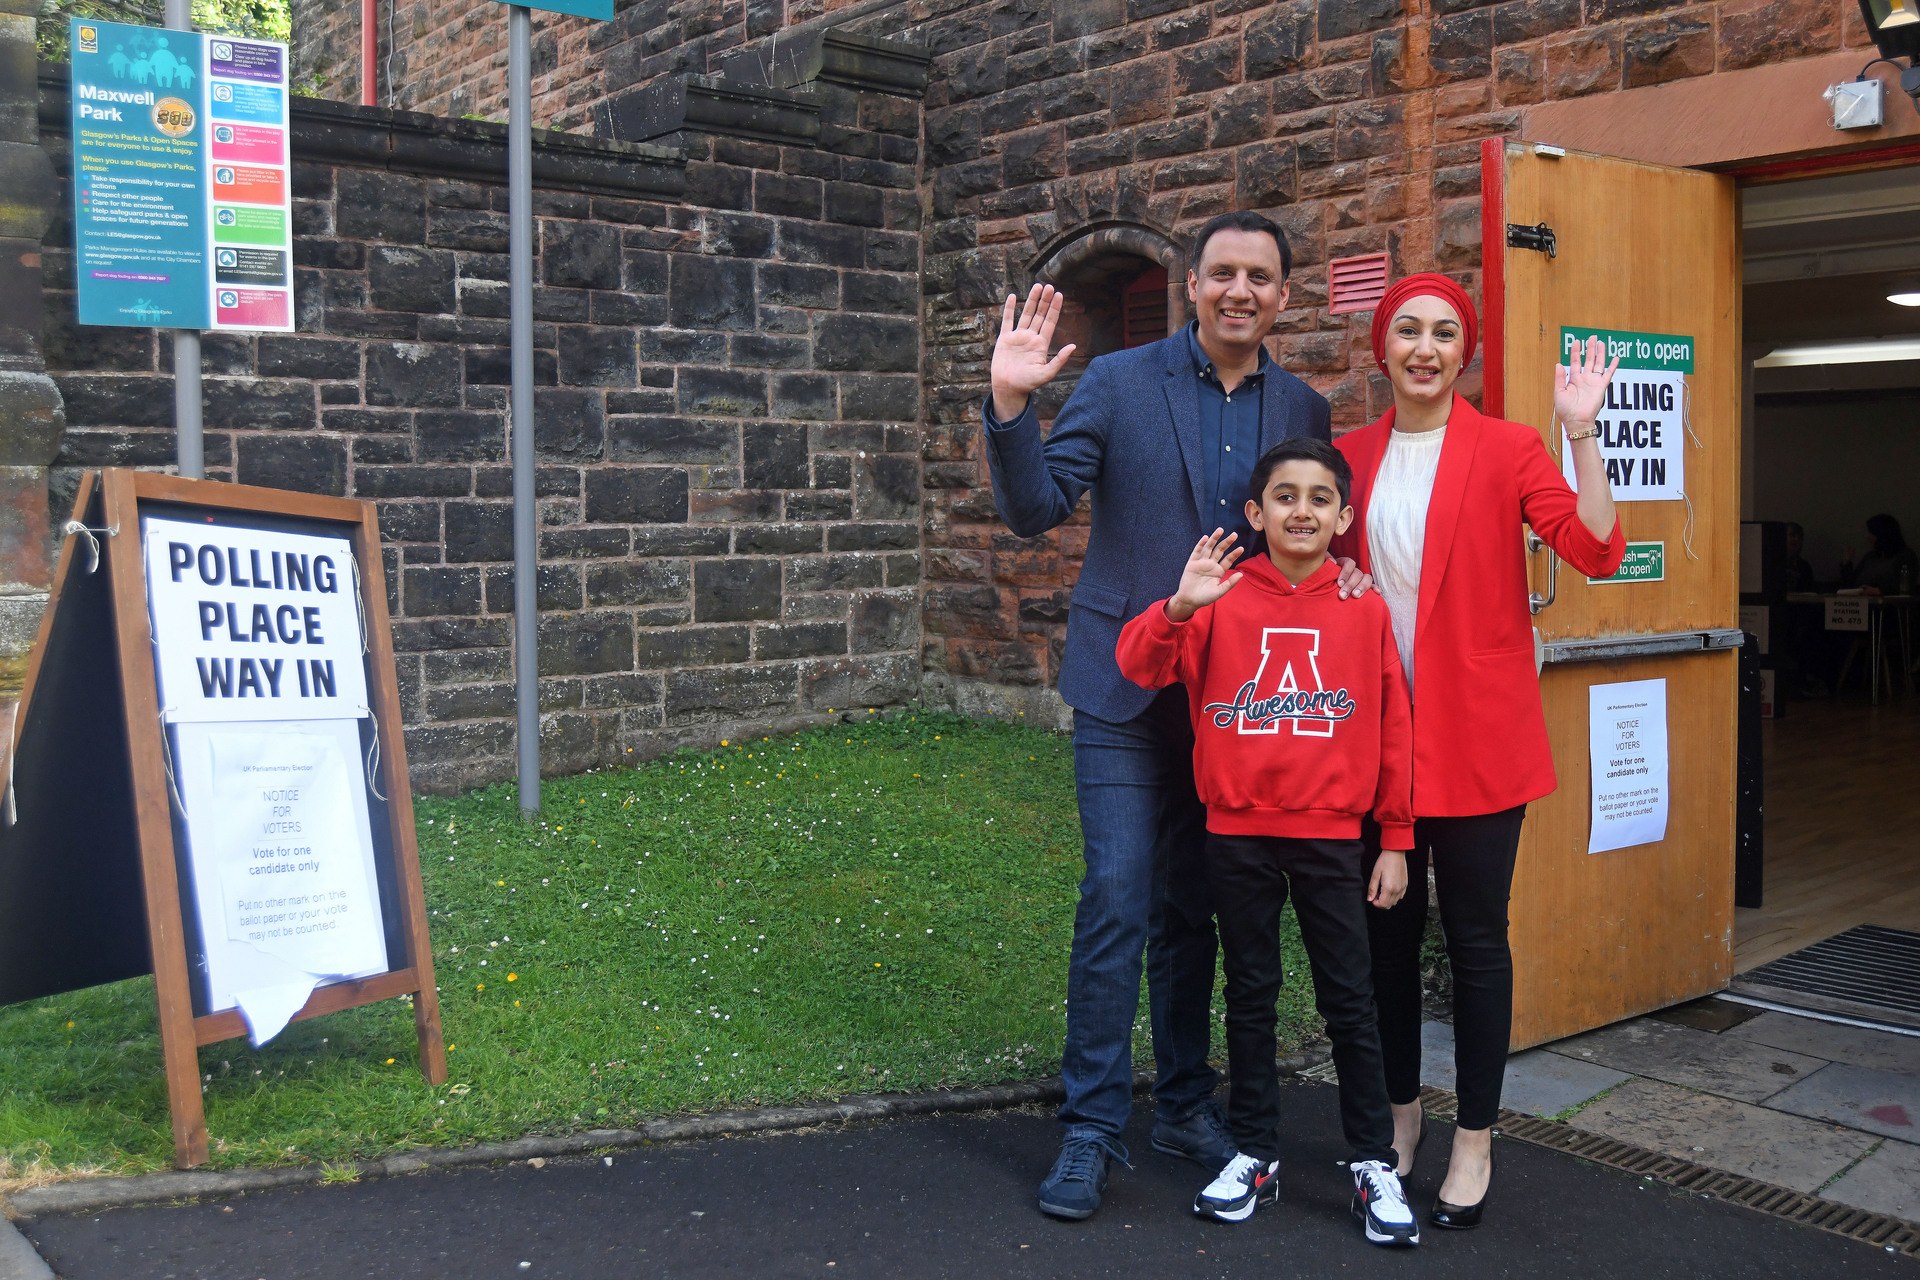 Leader of the Scottish Labour Party, Anas Sarwar, arrives with his family to vote at a polling station at Pollokshields Burgh Hall.